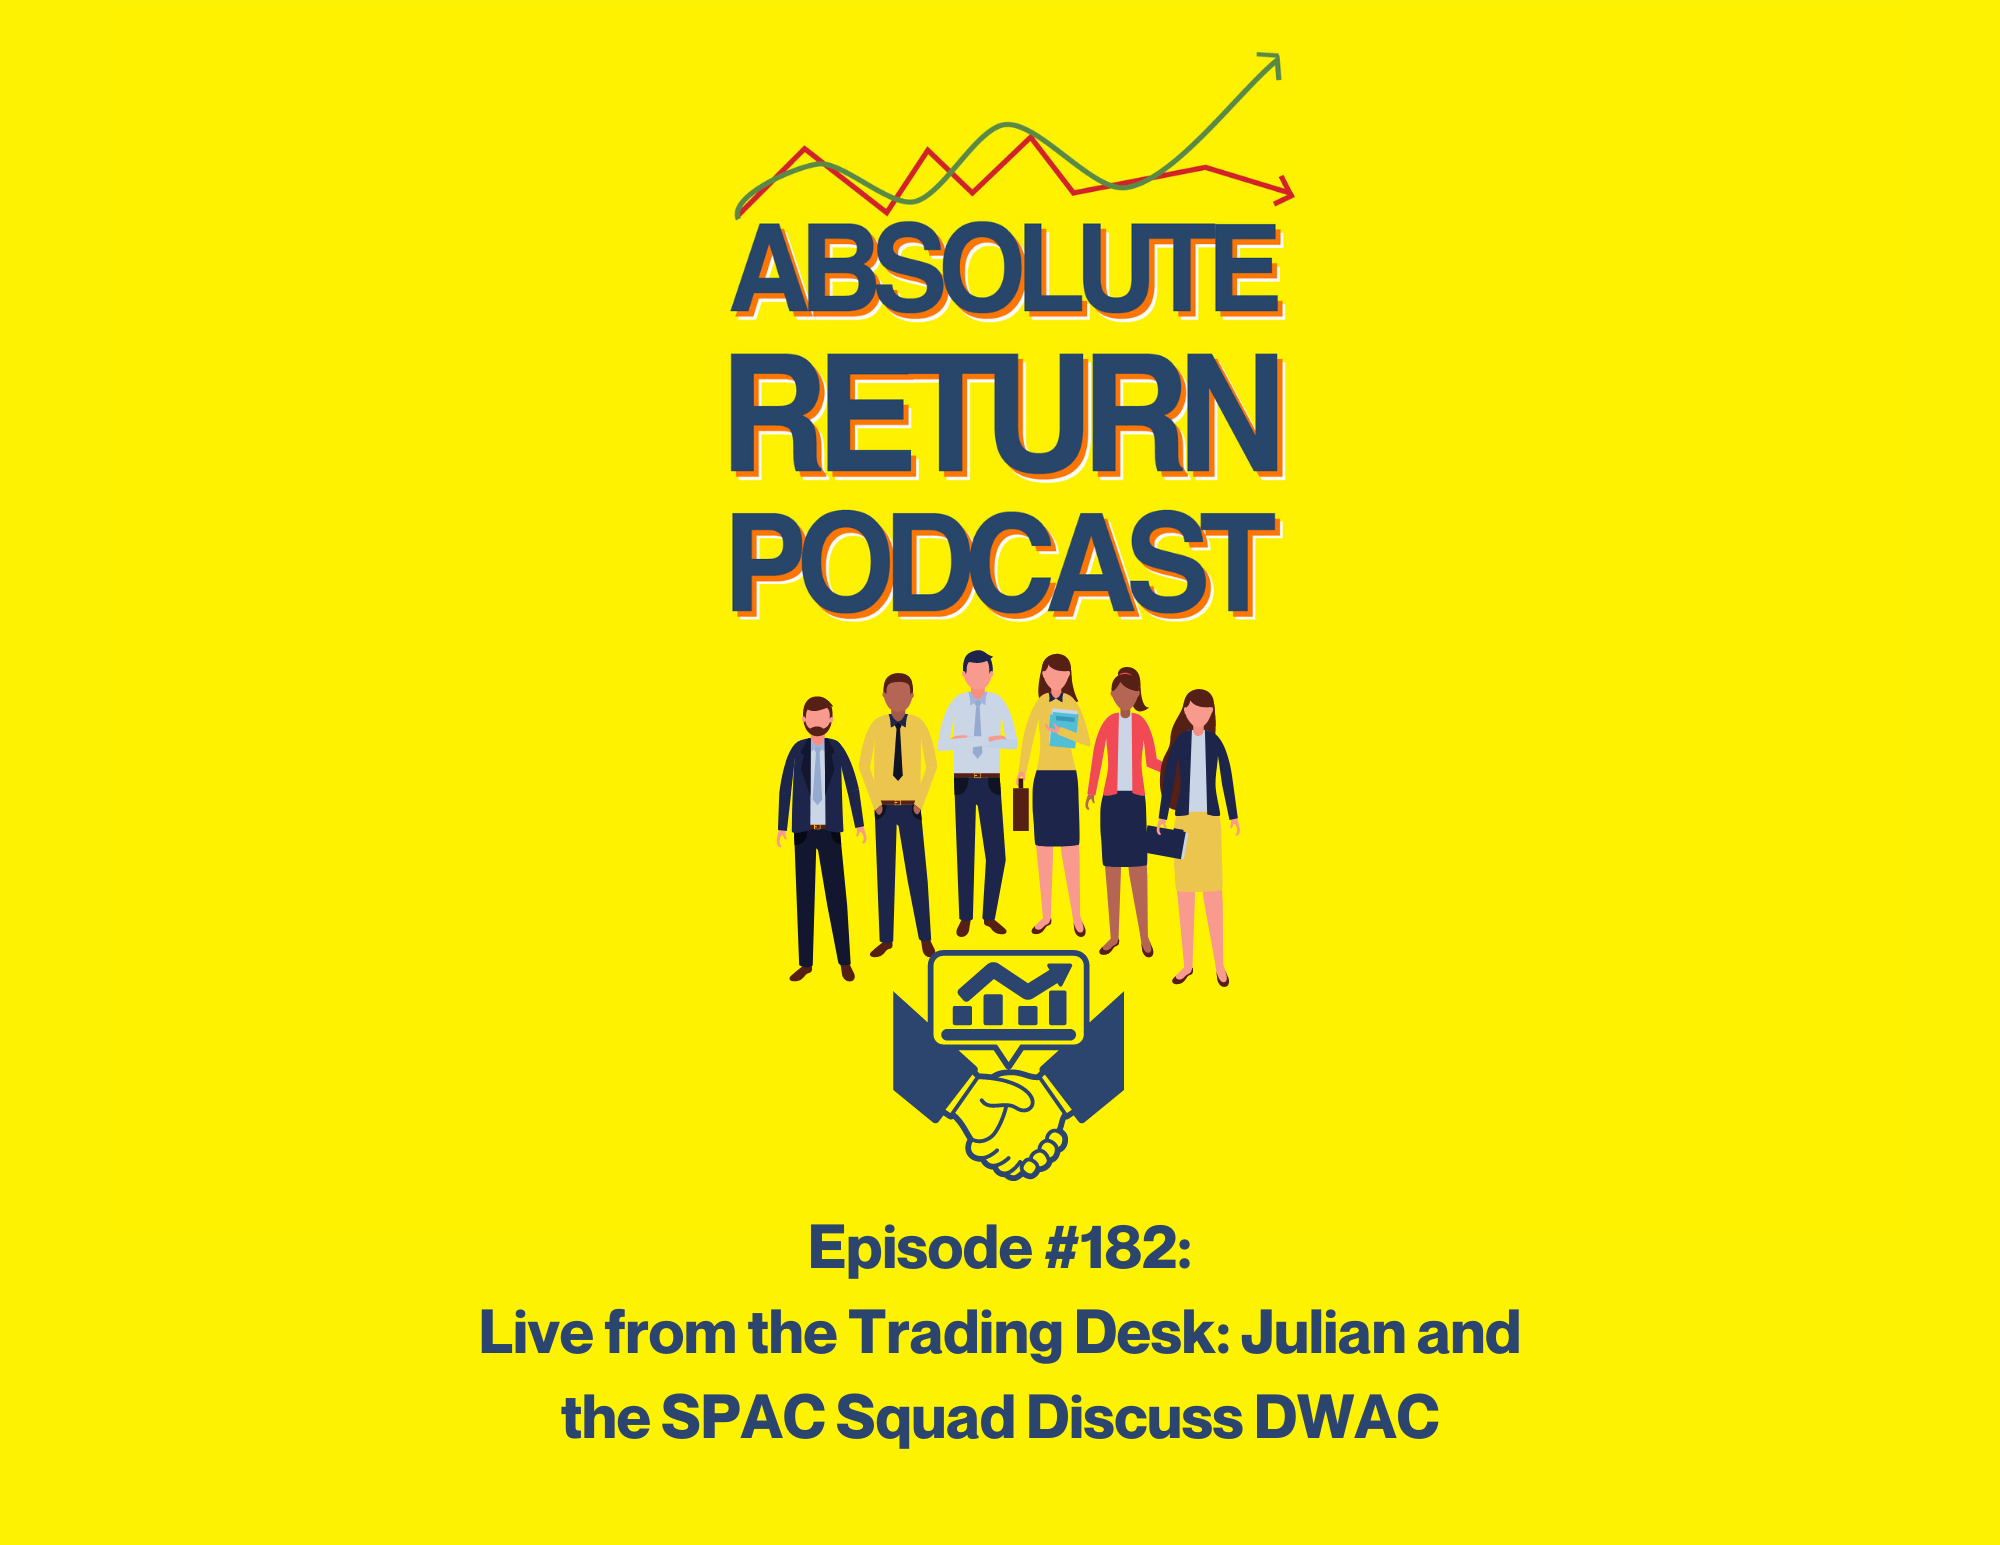 Absolute Return Podcast #182: Live from the Trading Desk: Julian and the SPAC Squad Discuss DWAC